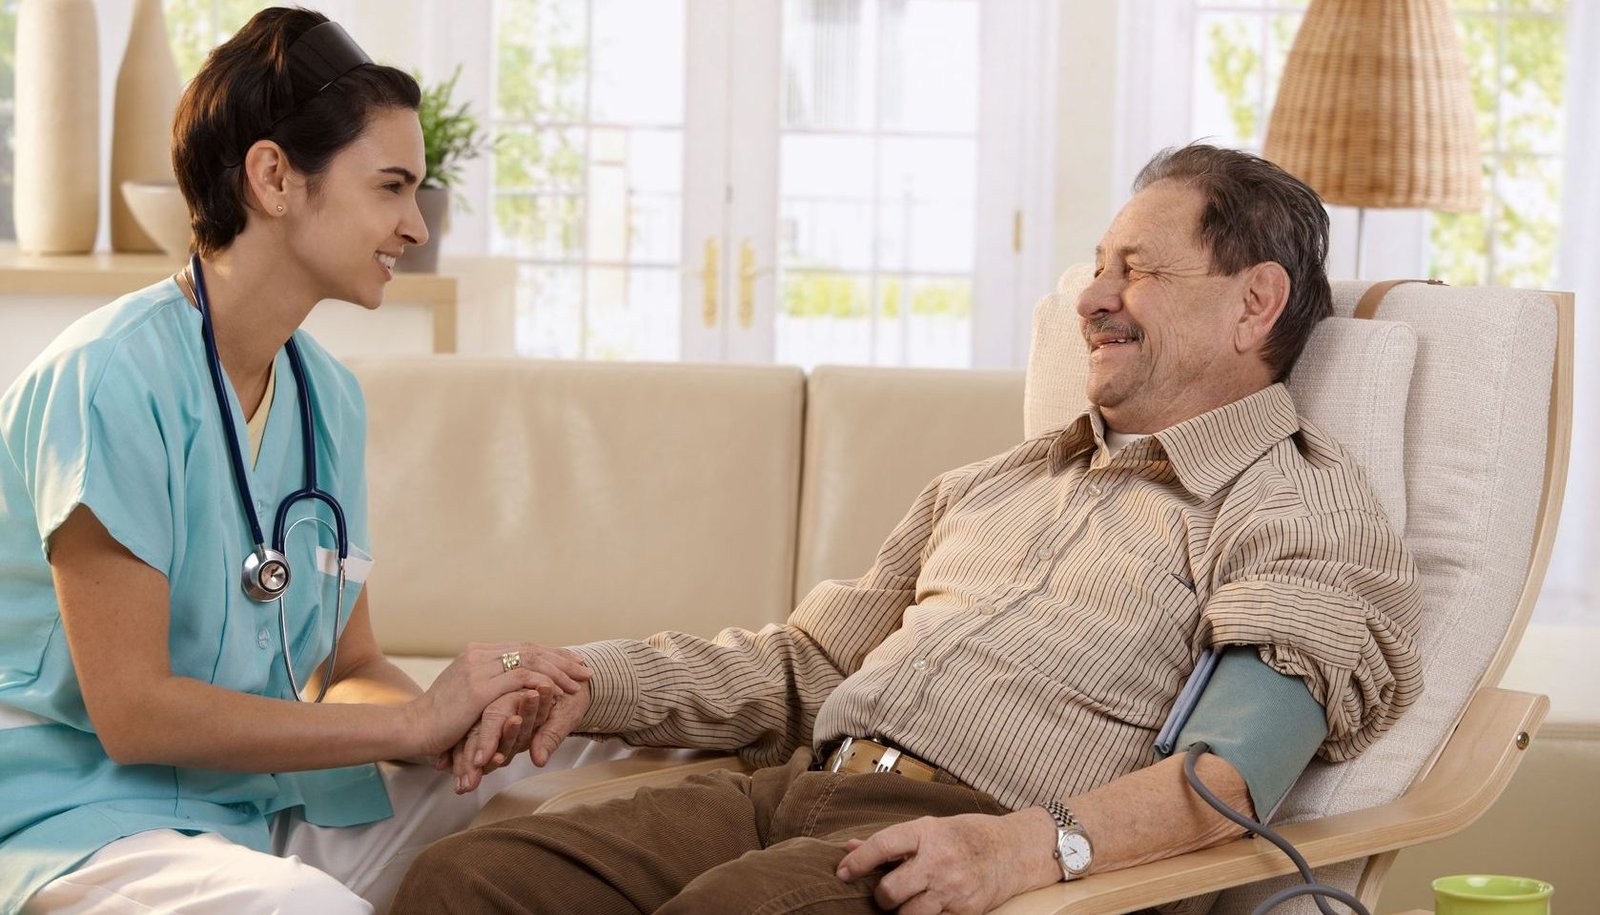 Home Patient Care Services in Pakistan